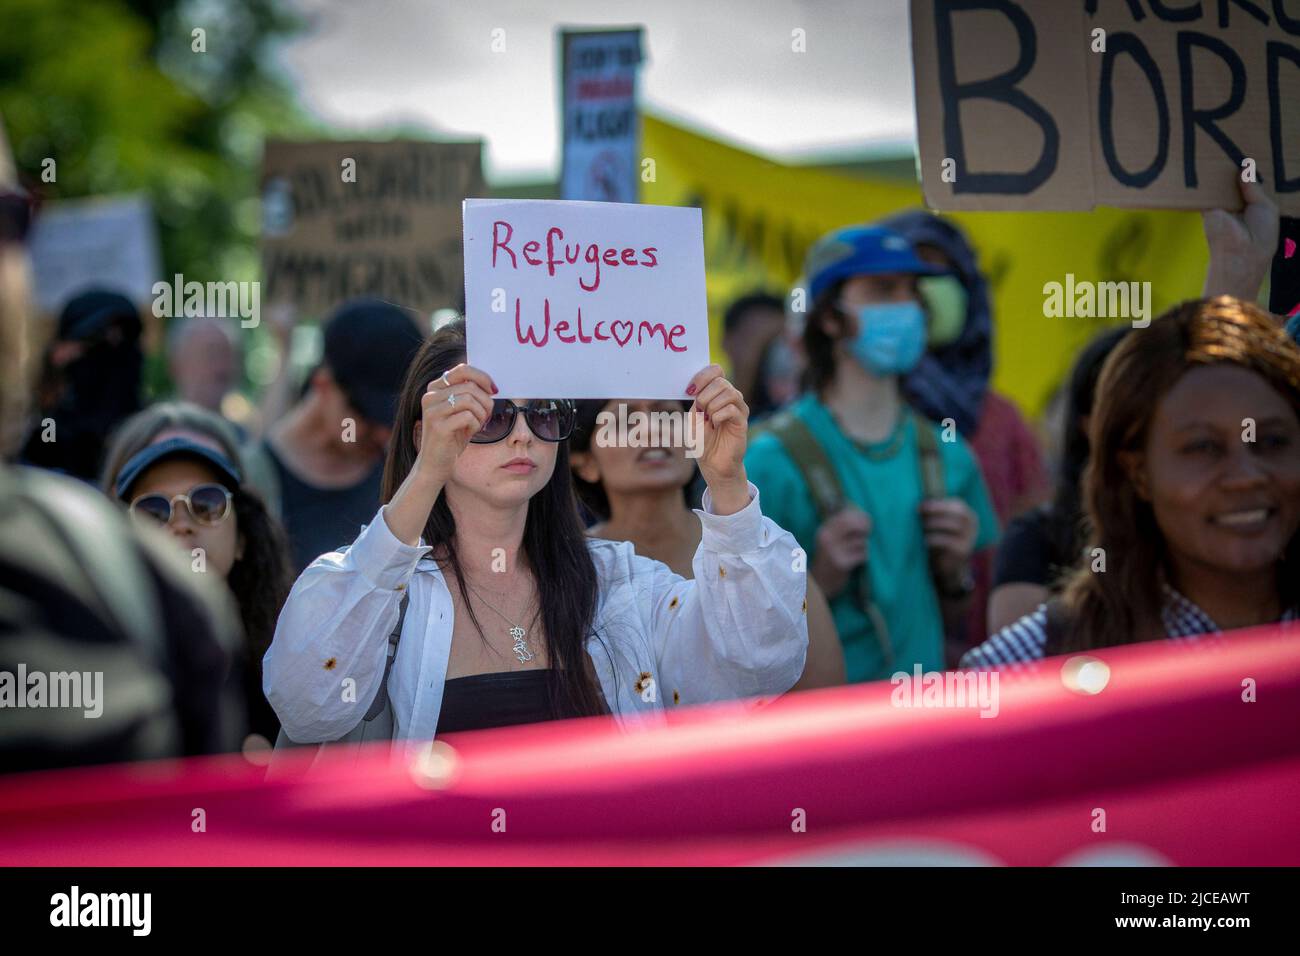 Protester holding sign refugees welcome in London, England. Stock Photo